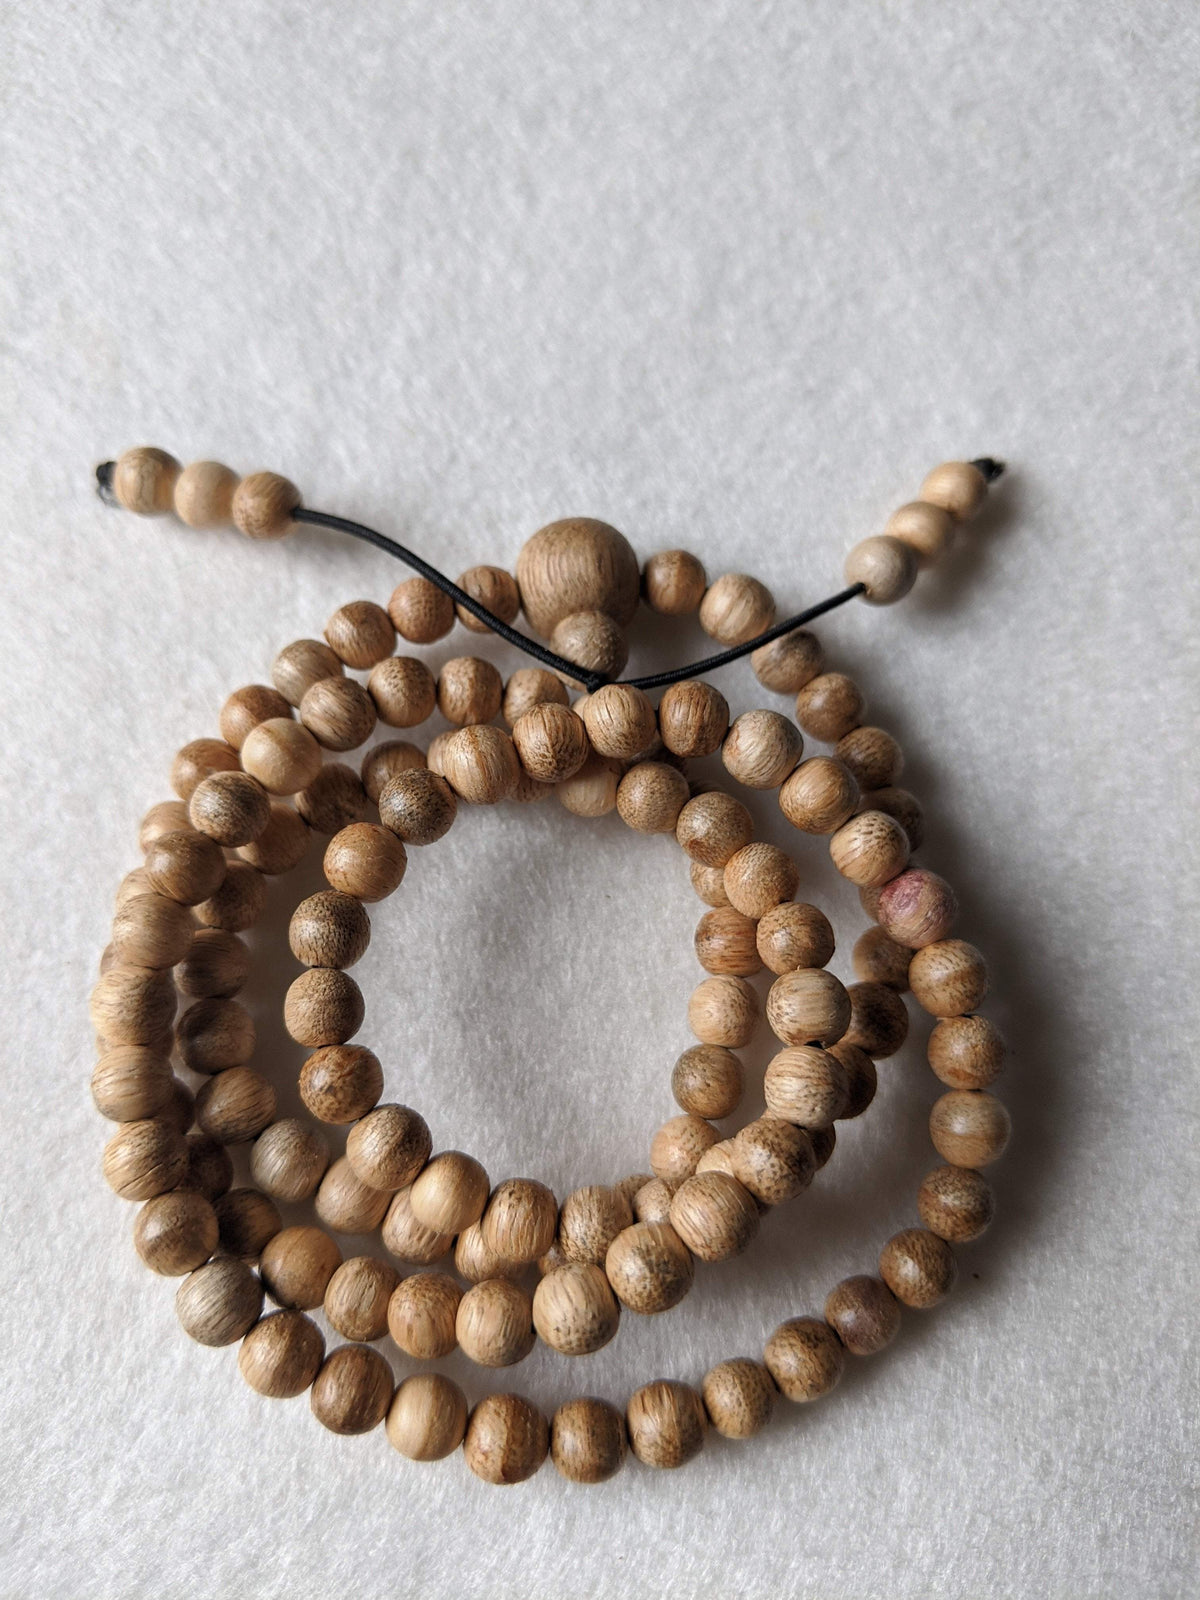 Z-SOLD OUT-Z 6mm Young wild agarwood mala 108 5g from Papua New Guinea -